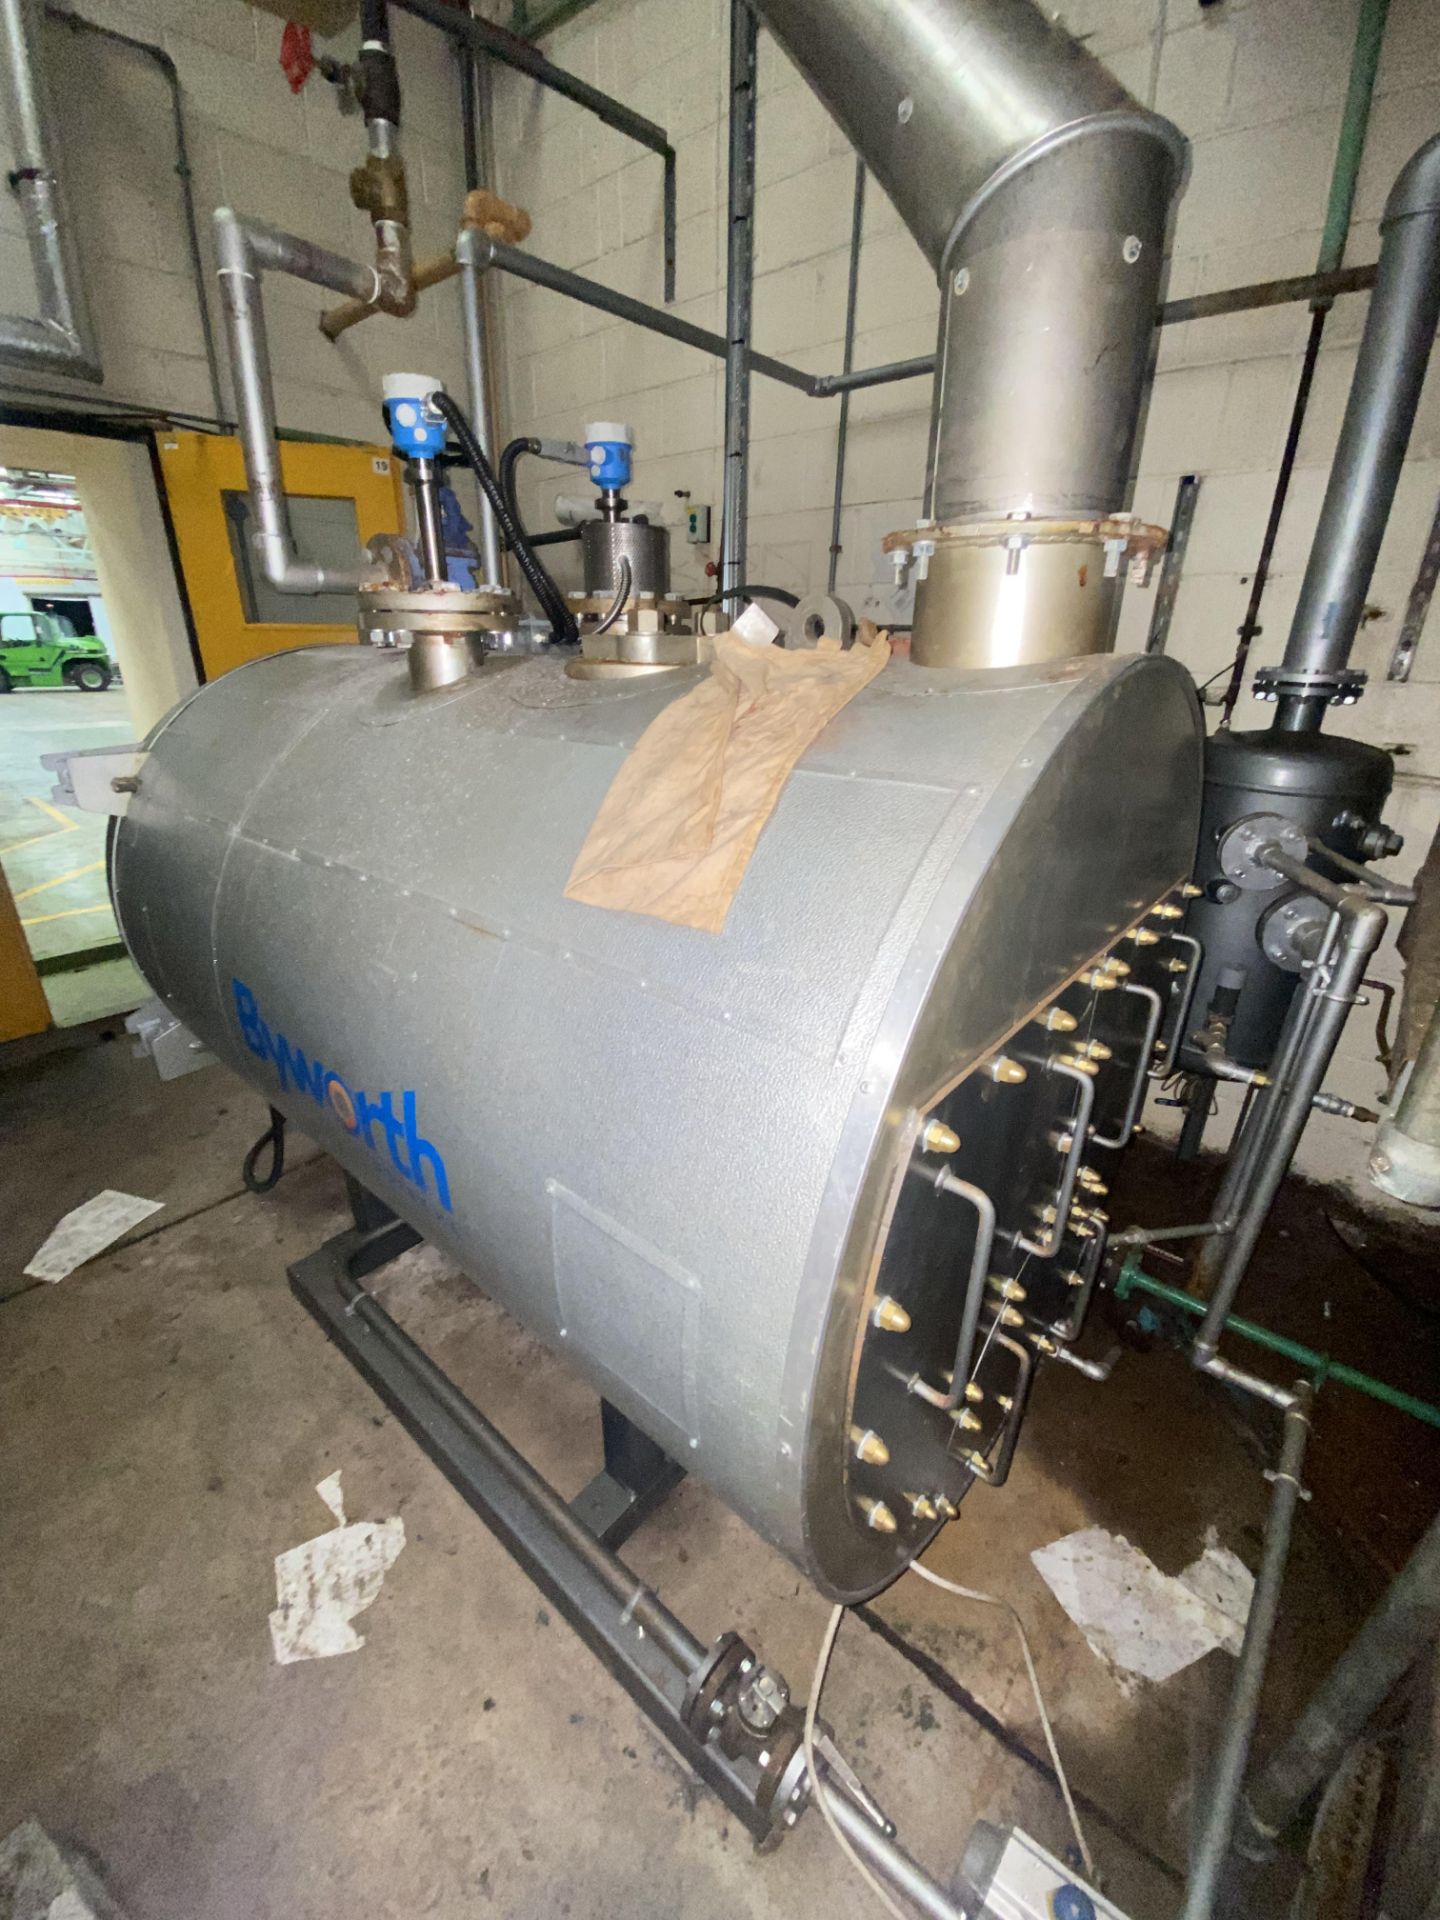 Byworth MX500-116 500kg/hr (F&A 100°C) GAS FIRED STEAM BOILER, serial no. MX500-116, date of - Image 11 of 17